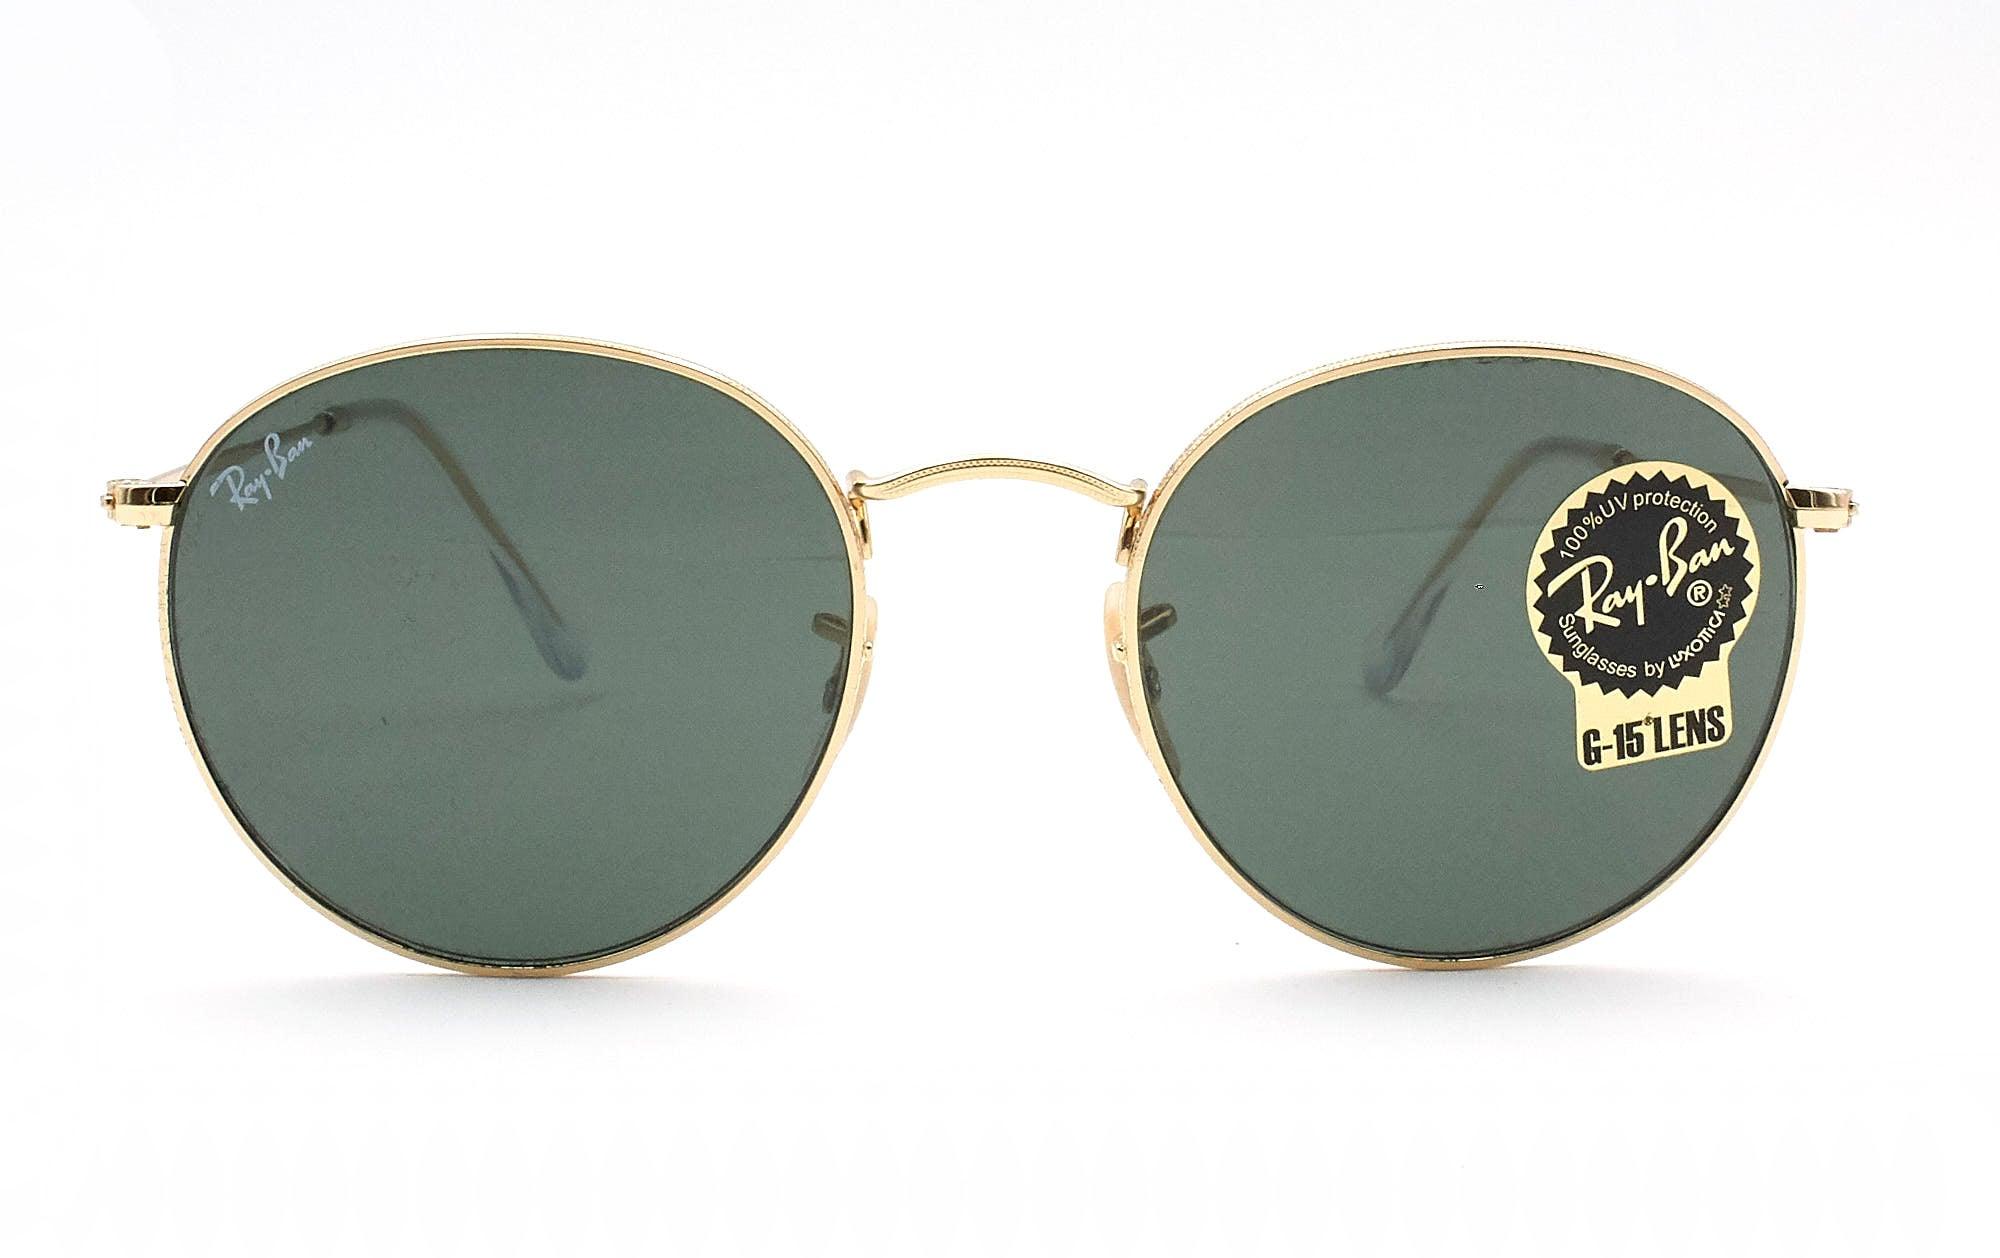 RAY-BAN ROUND METAL 001 - Opticas Lookout